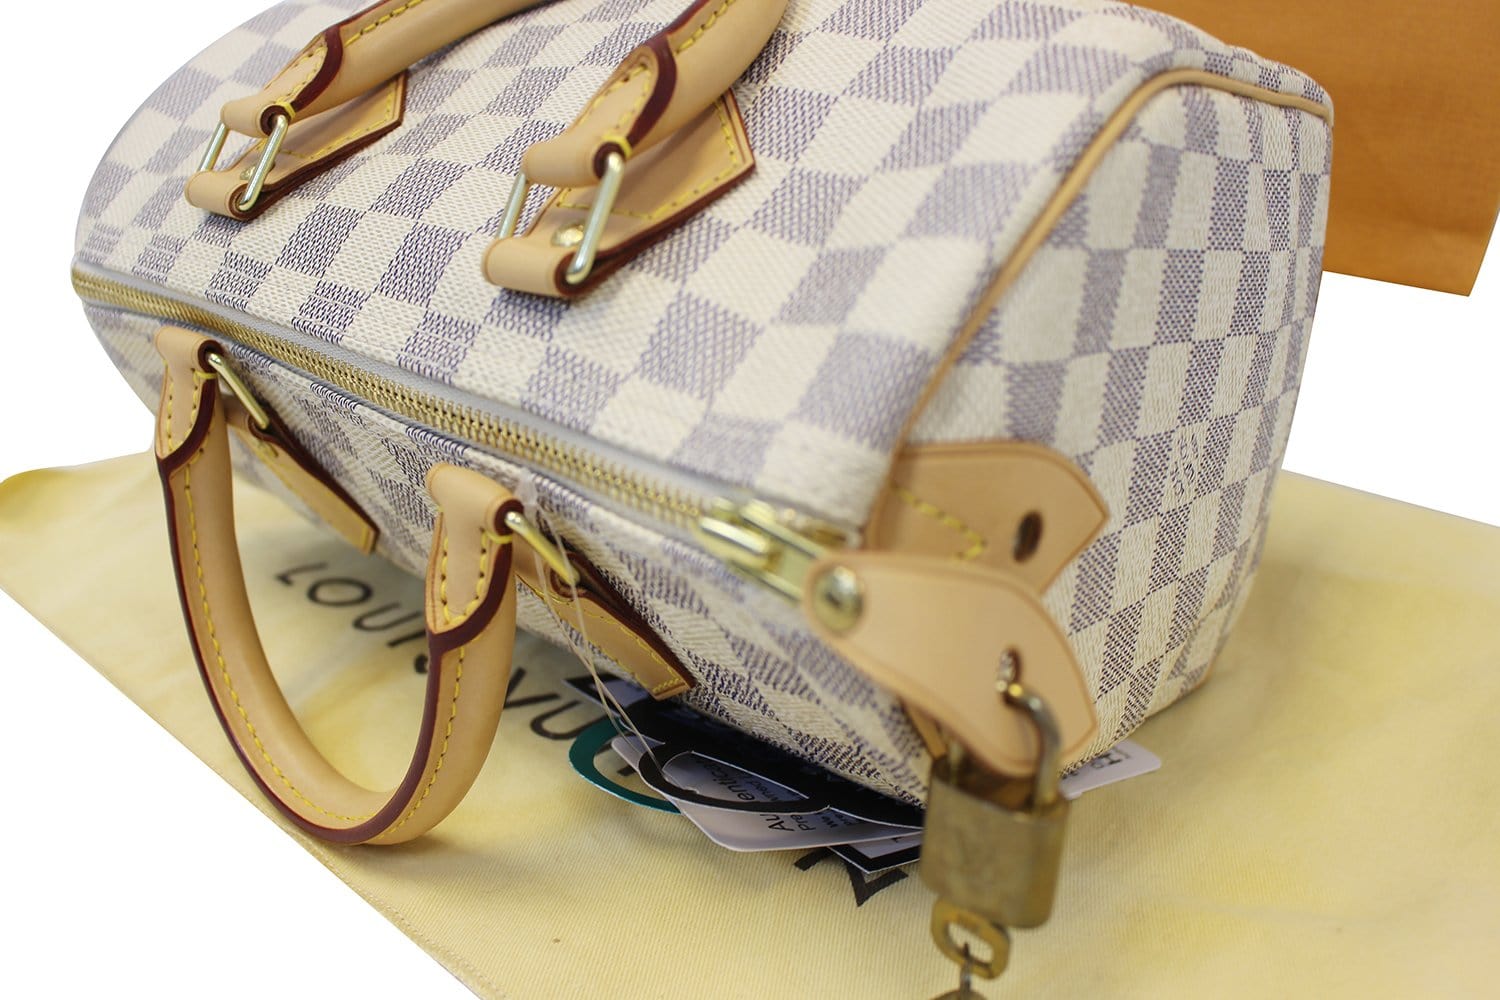 All About Louis Vuitton (LV) Speedy, Monogram, Damier Ebene, Damier Azur,  Bandouliere, and Other Styles! - HubPages